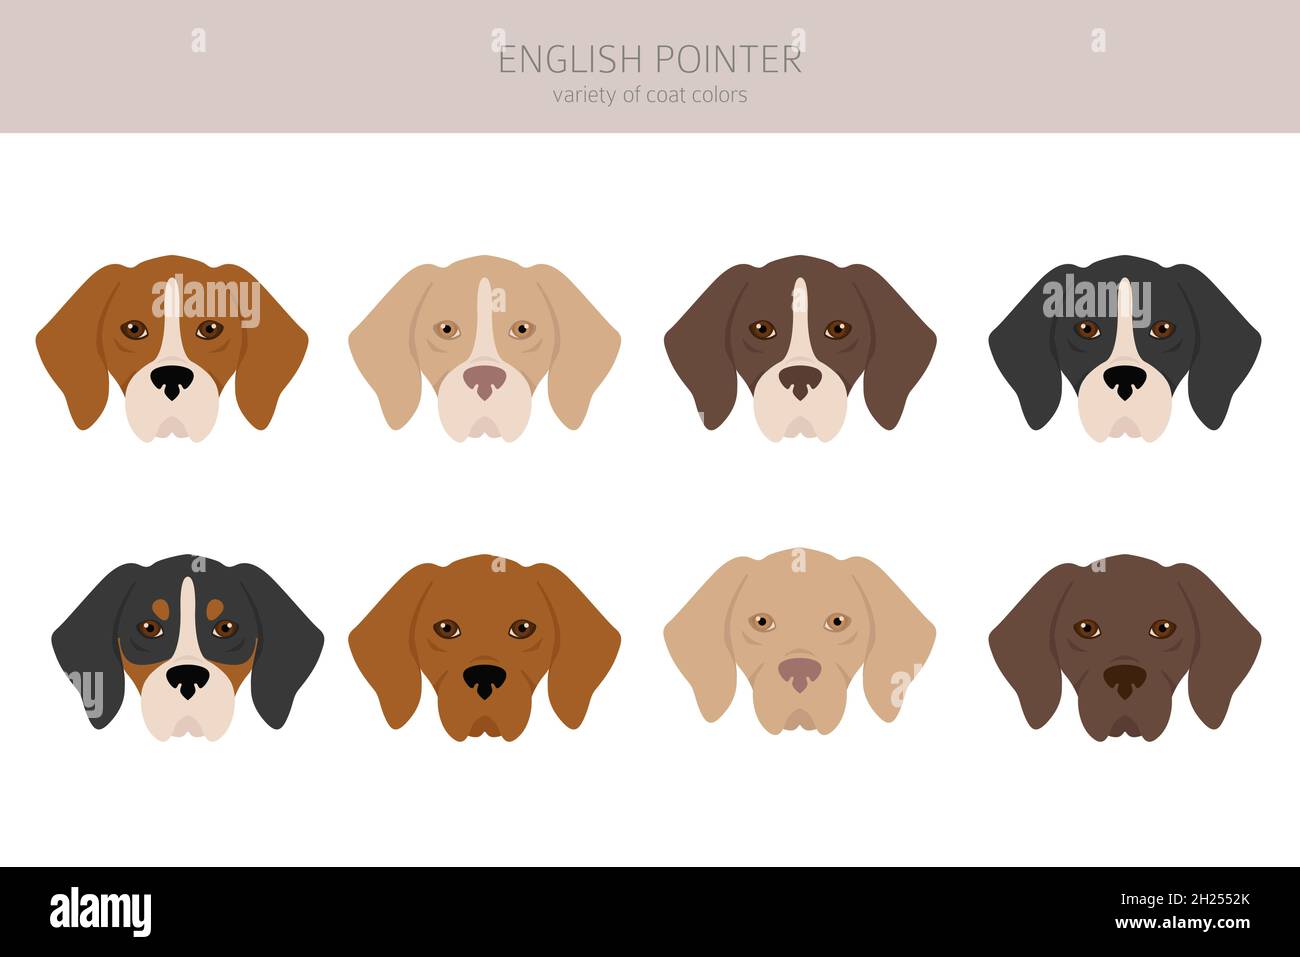 english-pointer-clipart-different-poses-coat-colors-set-vector-illustration-2H2552K.jpg